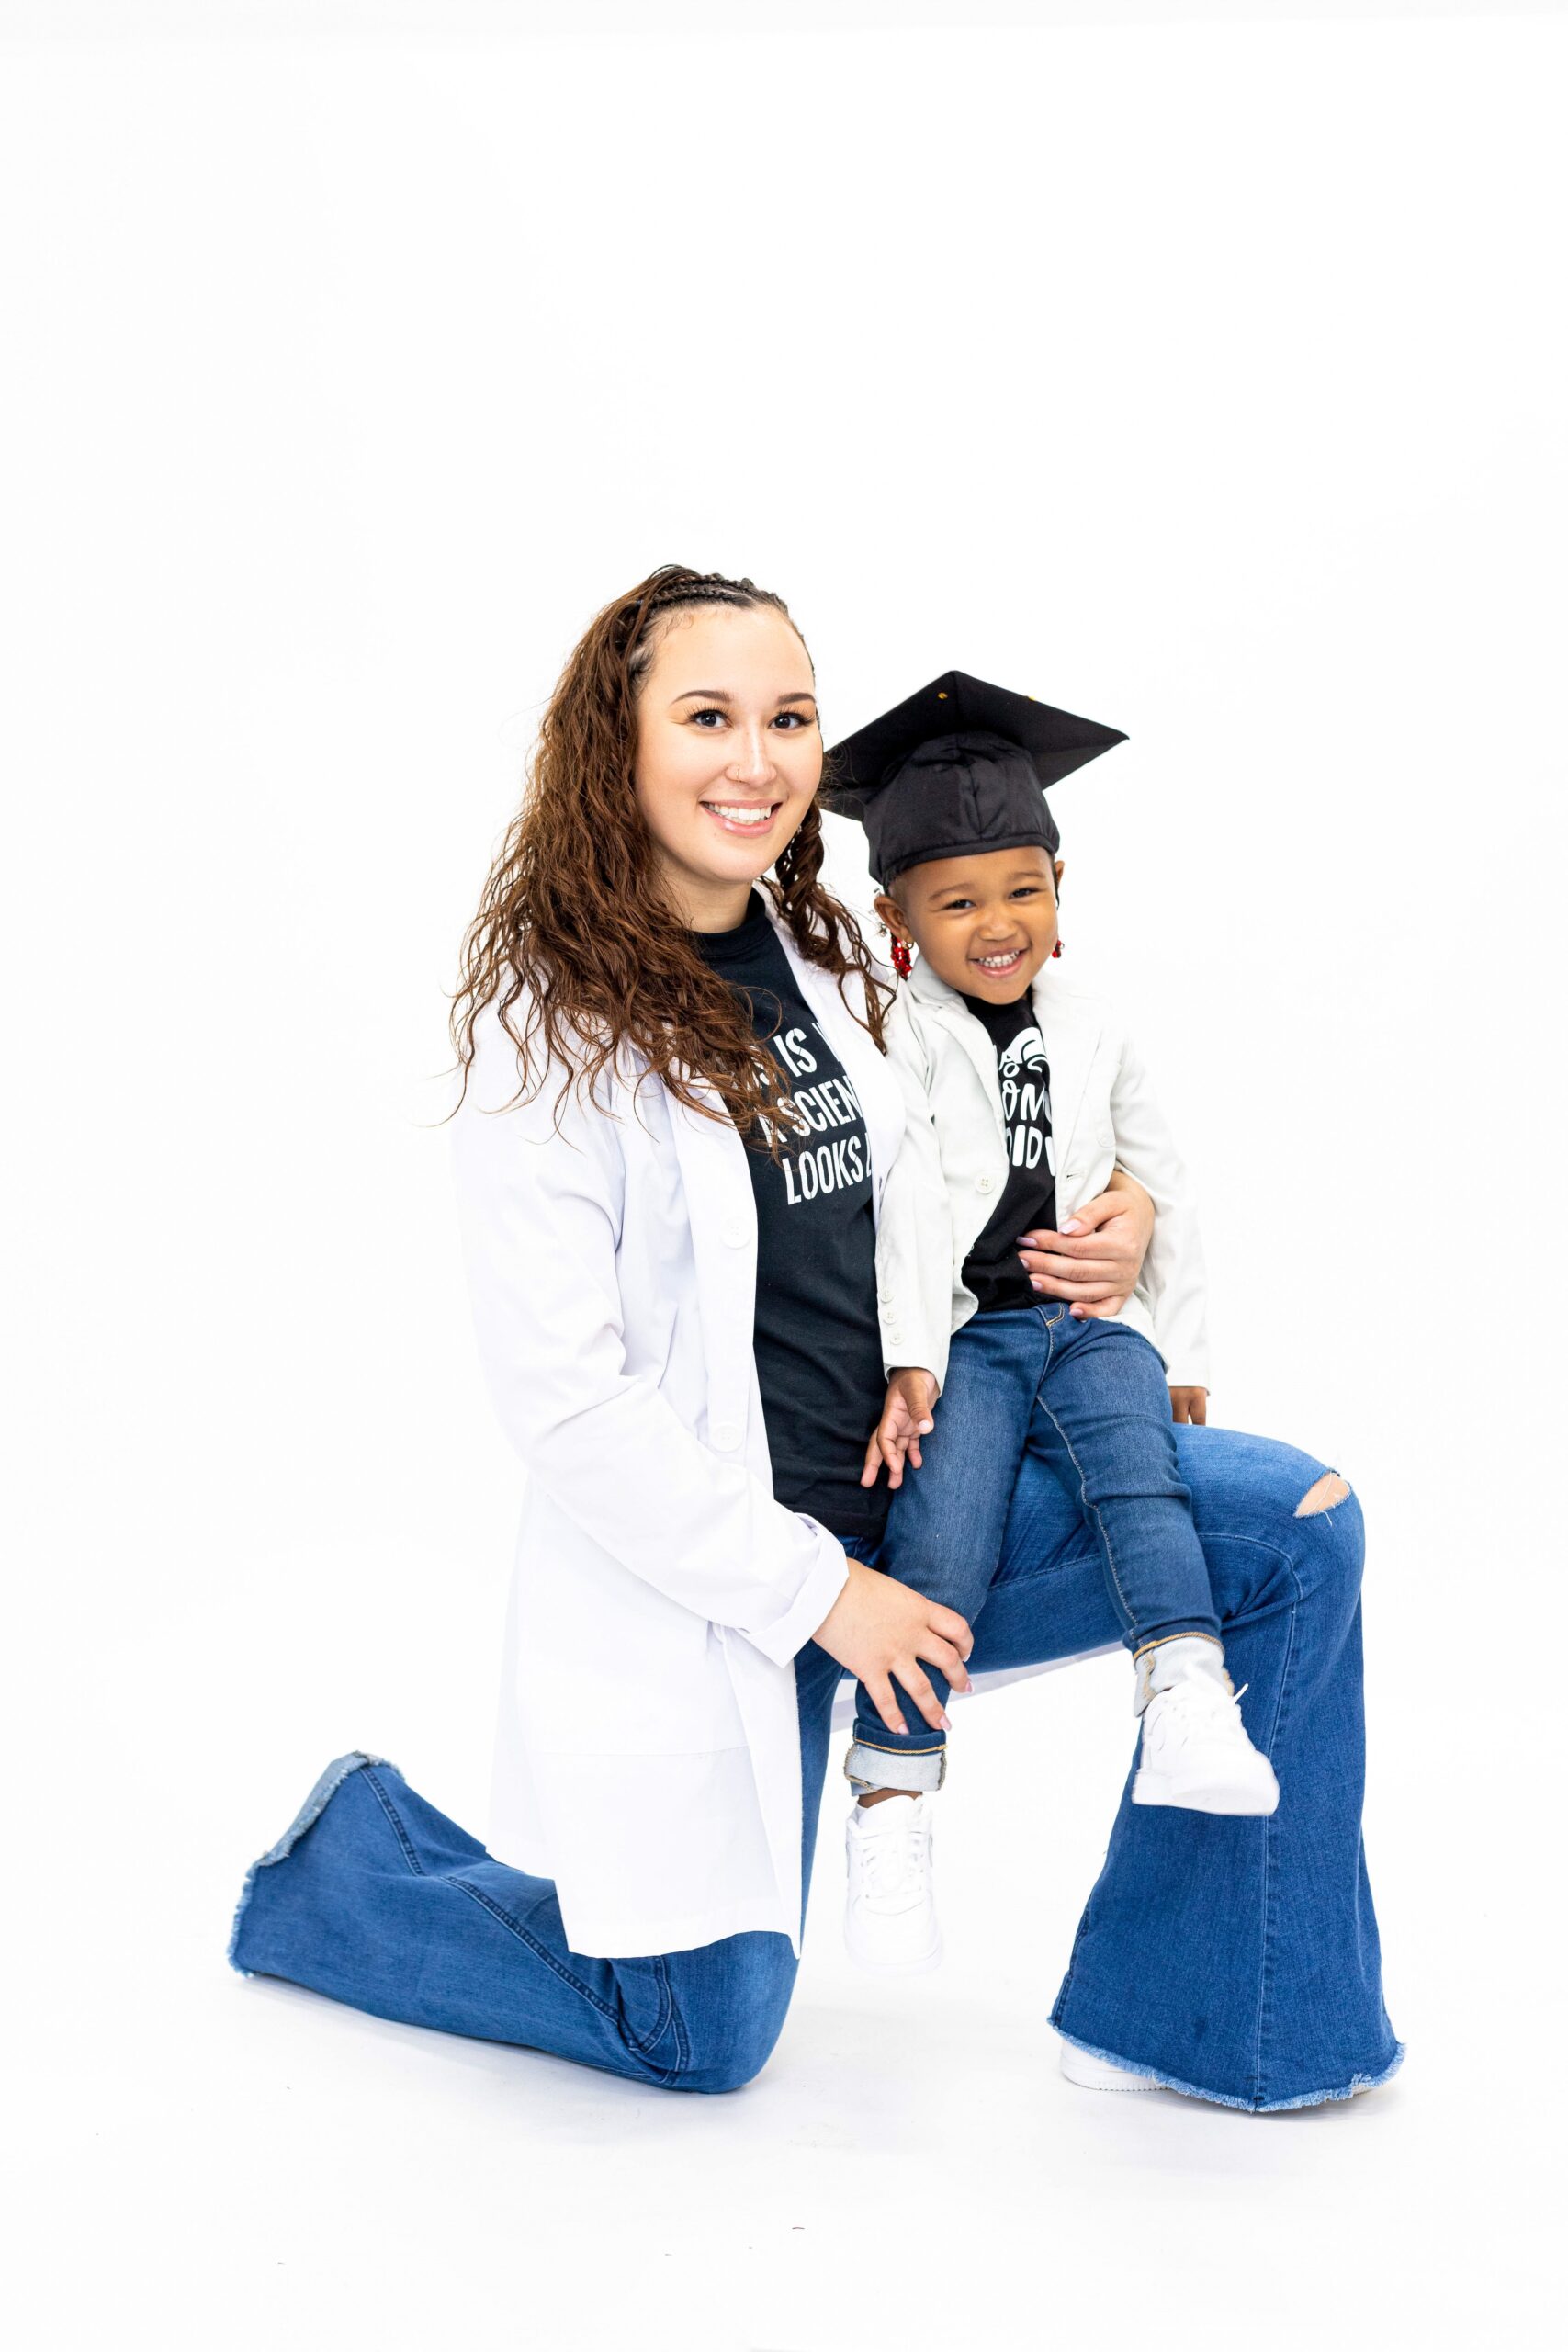 Kayleigh Baylor: Laurel Ridge was “life changing” for Medical Laboratory Technology graduate